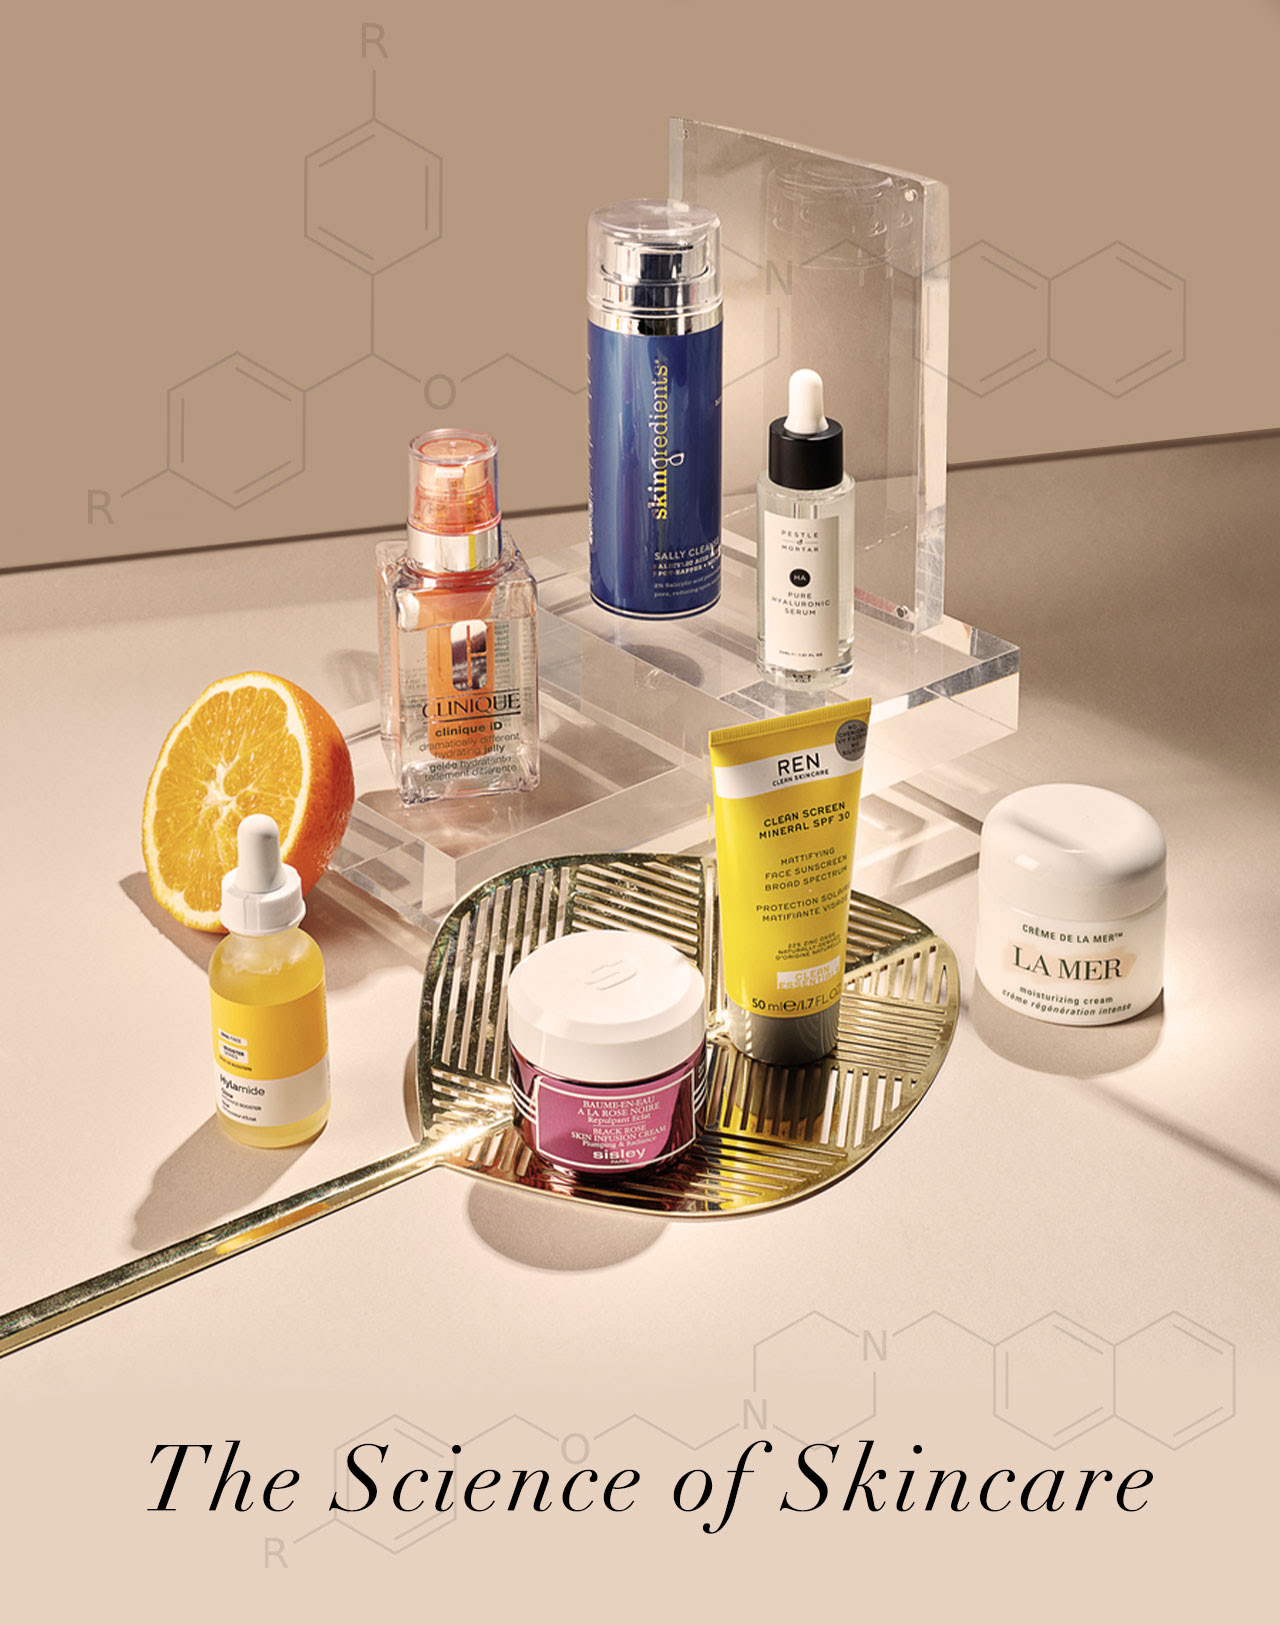 Brown Thomas - The science of skincare - your products explained